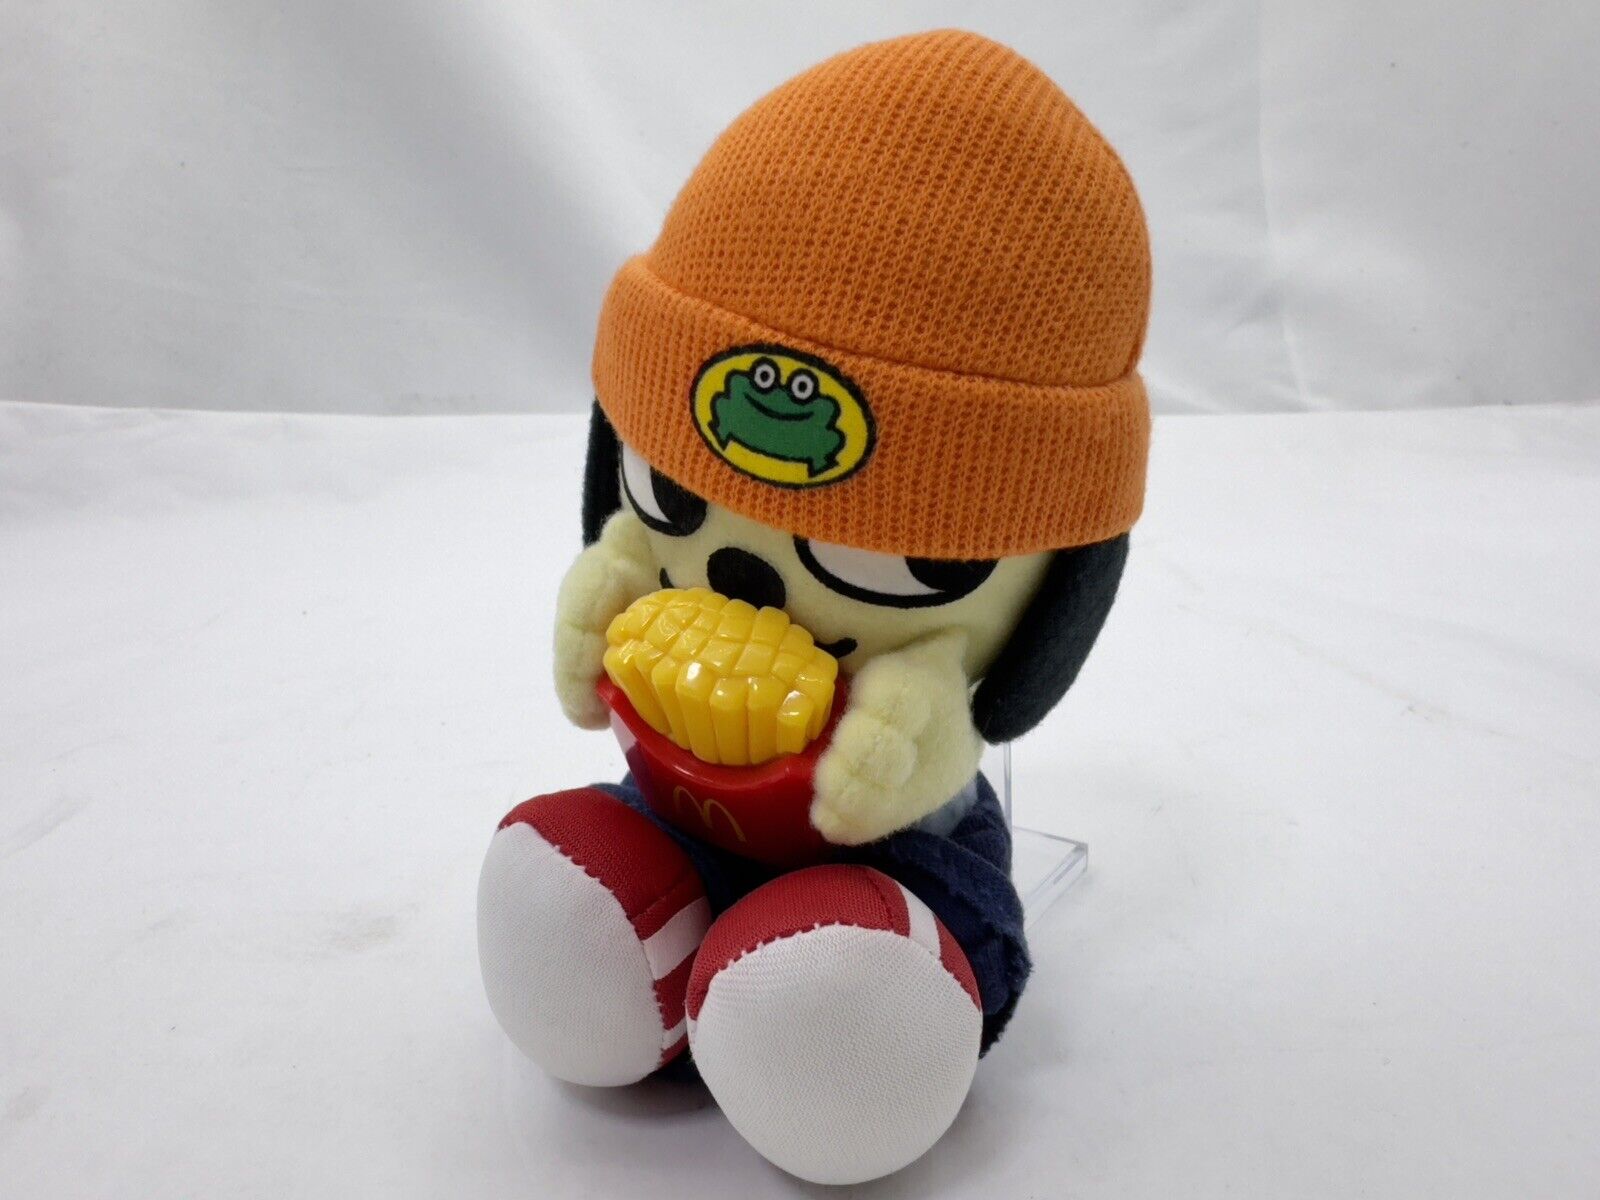 PaRappa the Rapper Mcdonald's Plush toy Vibration French Fries Doll